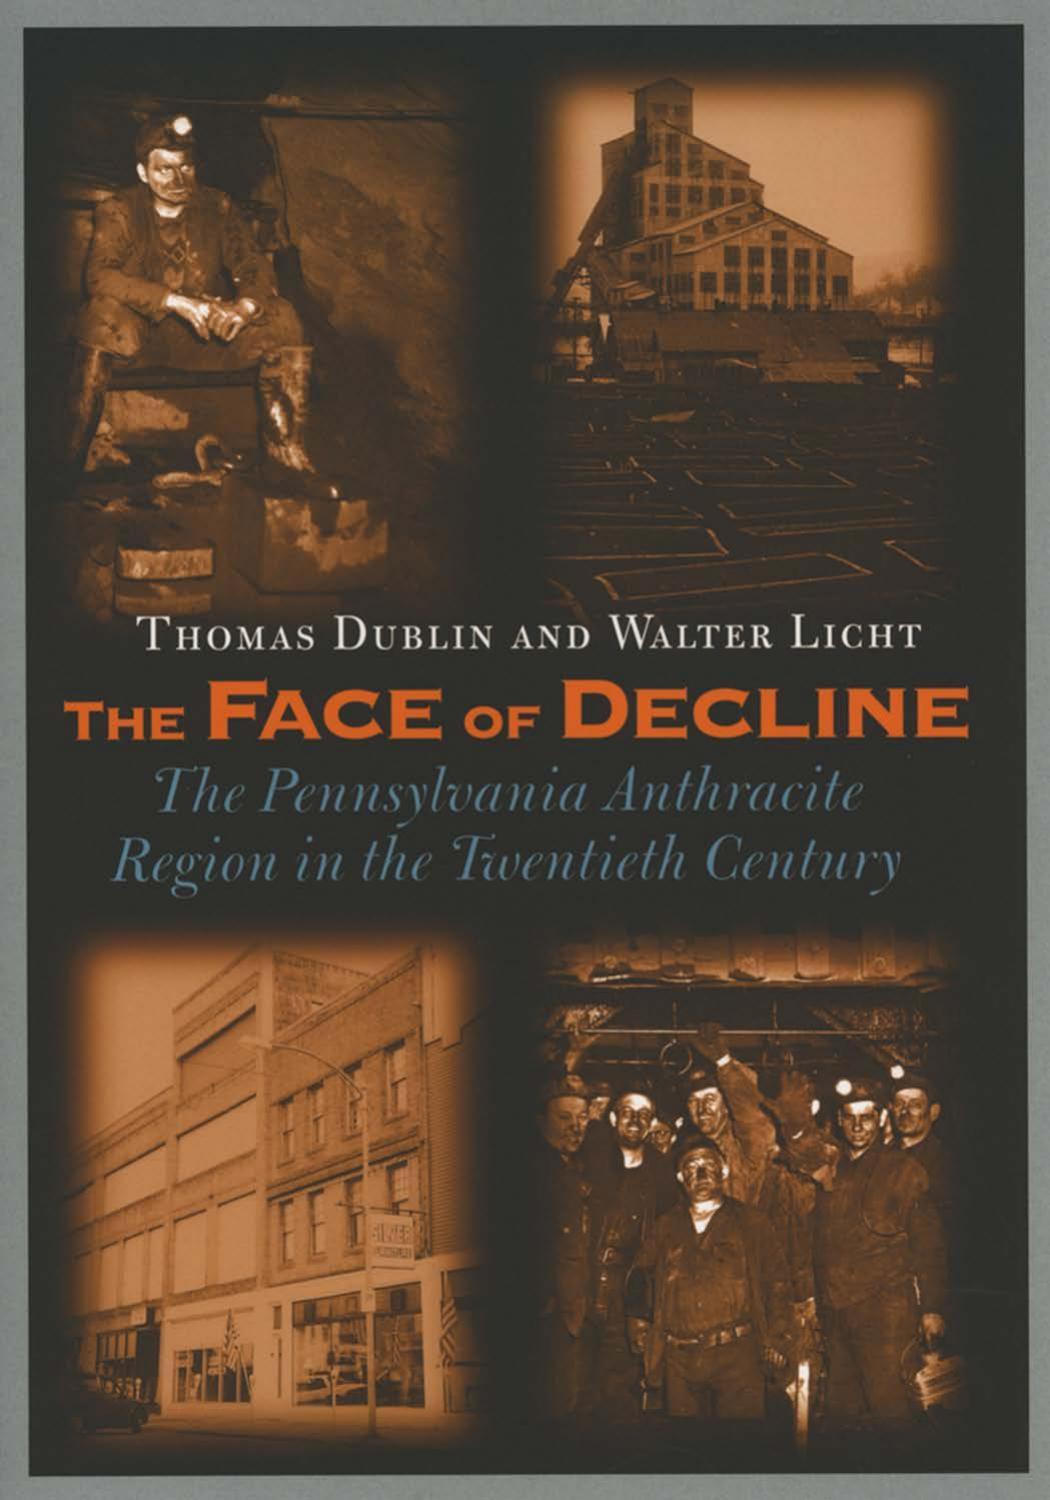 The Face of Decline: The Pennsylvania Anthracite Region in the Twentieth Century by by Thomas Dublin & Walter Licht